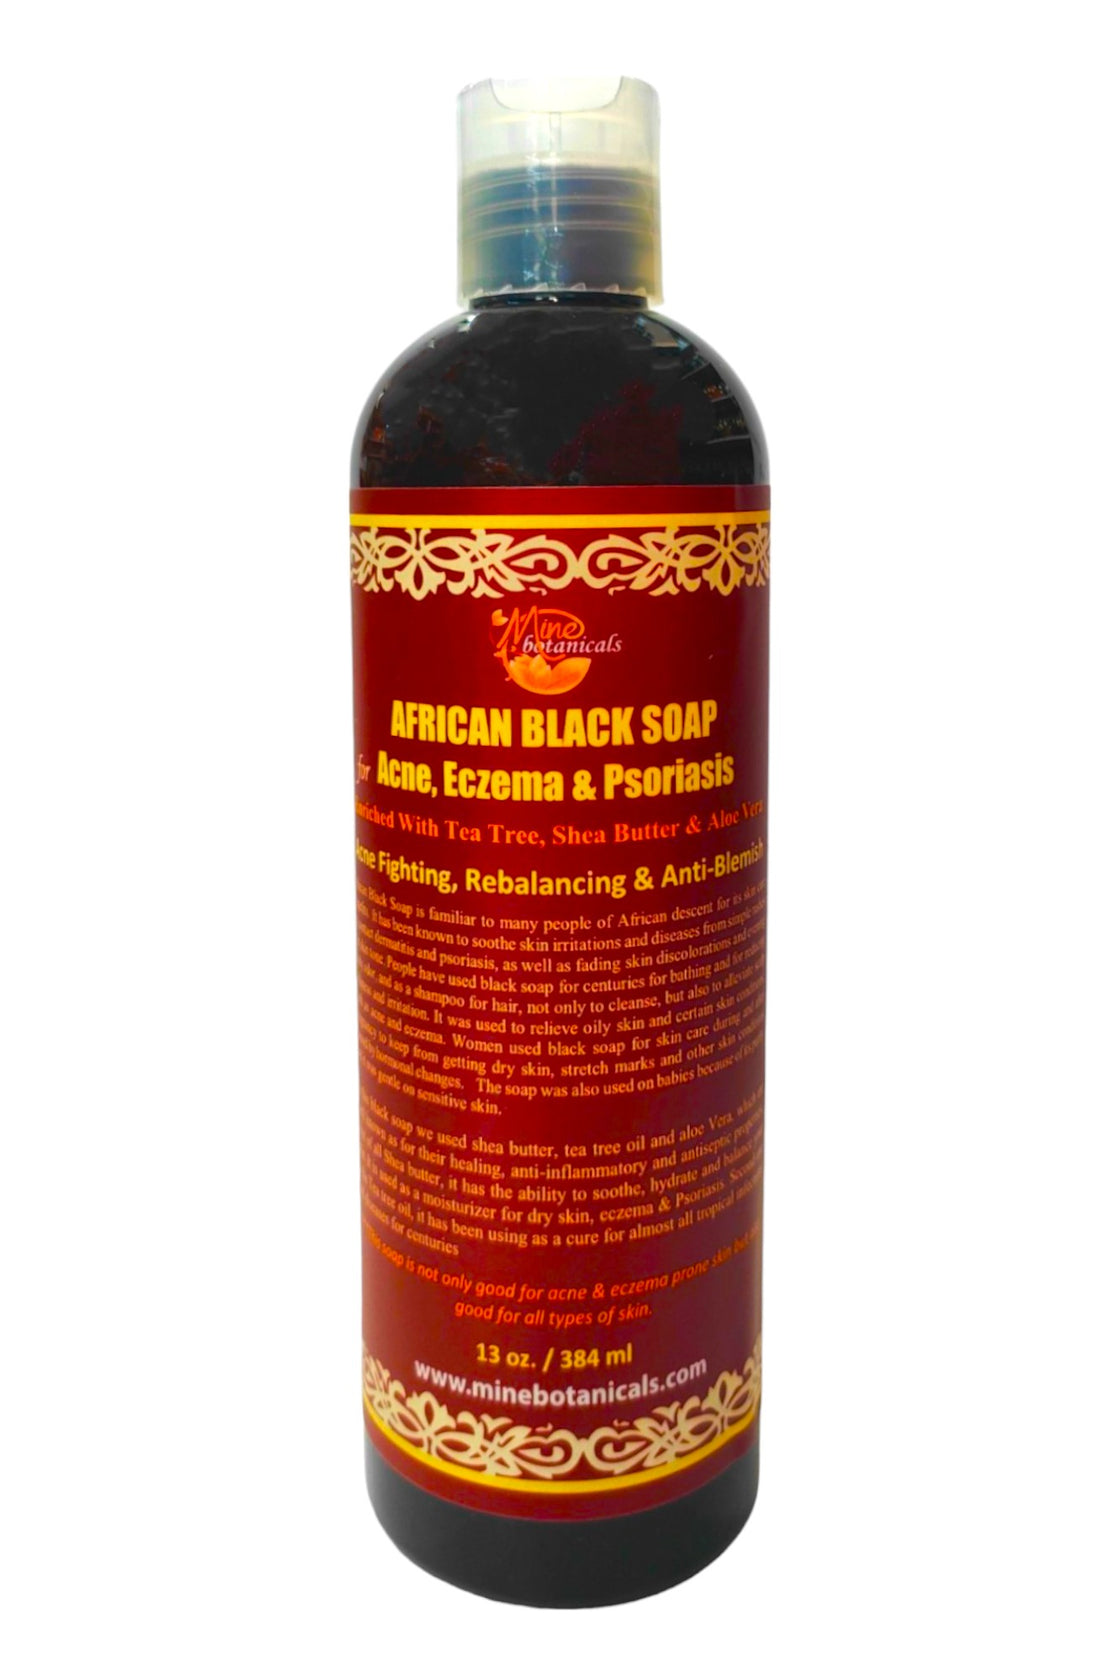 African Black Soap For Acne, Eczema & Psoriasis